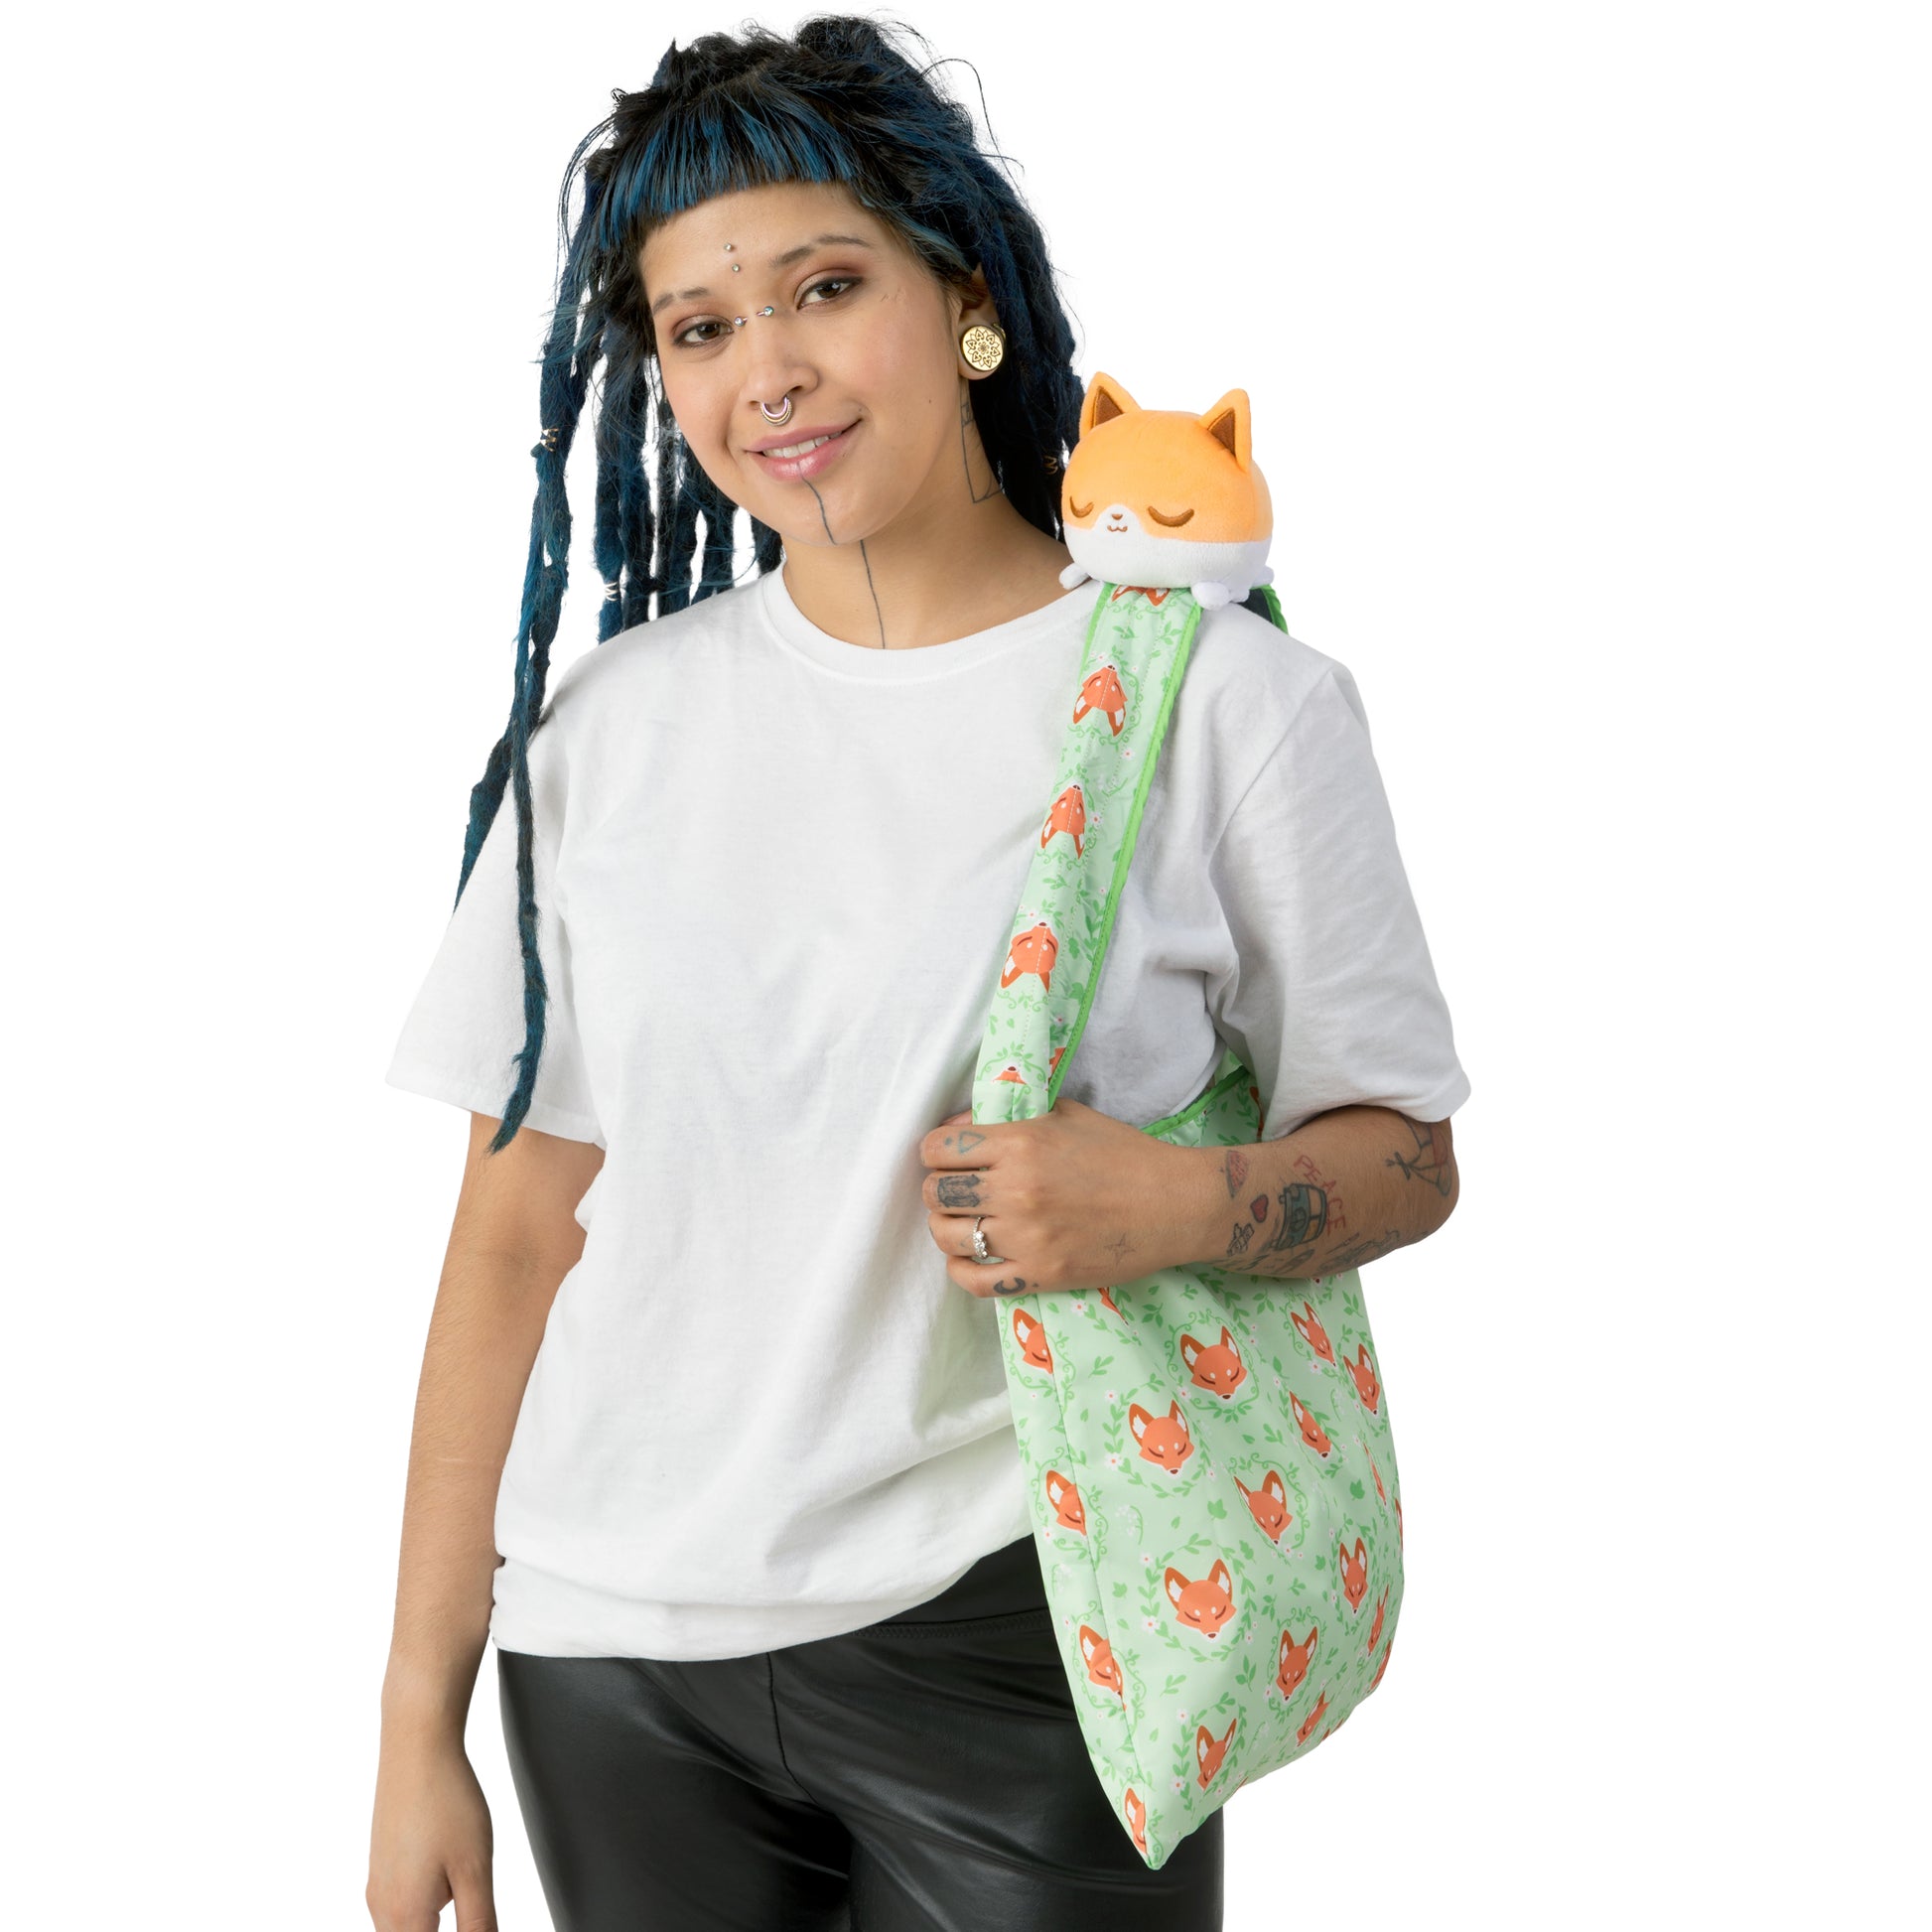 A woman with dreadlocks holding a bag with a TeeTurtle Plushiverse Floral Fox Plushie Tote Bag.